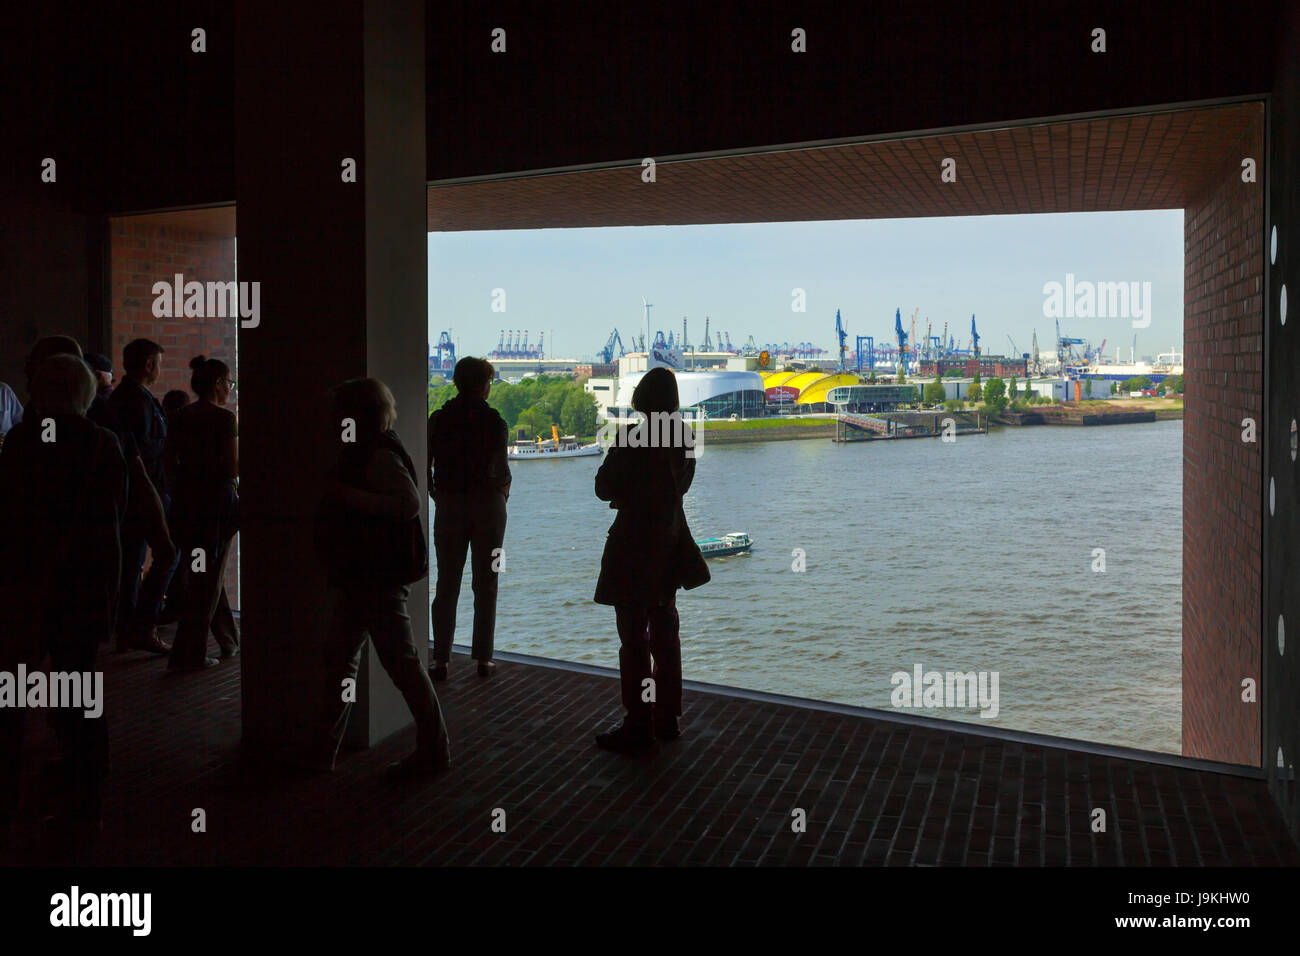 Hamburg, Germany - May 17, 2017: View from the inside of Elbe Philharmonic Hall over to the harbor on south bank of Elbe ricer Stock Photo